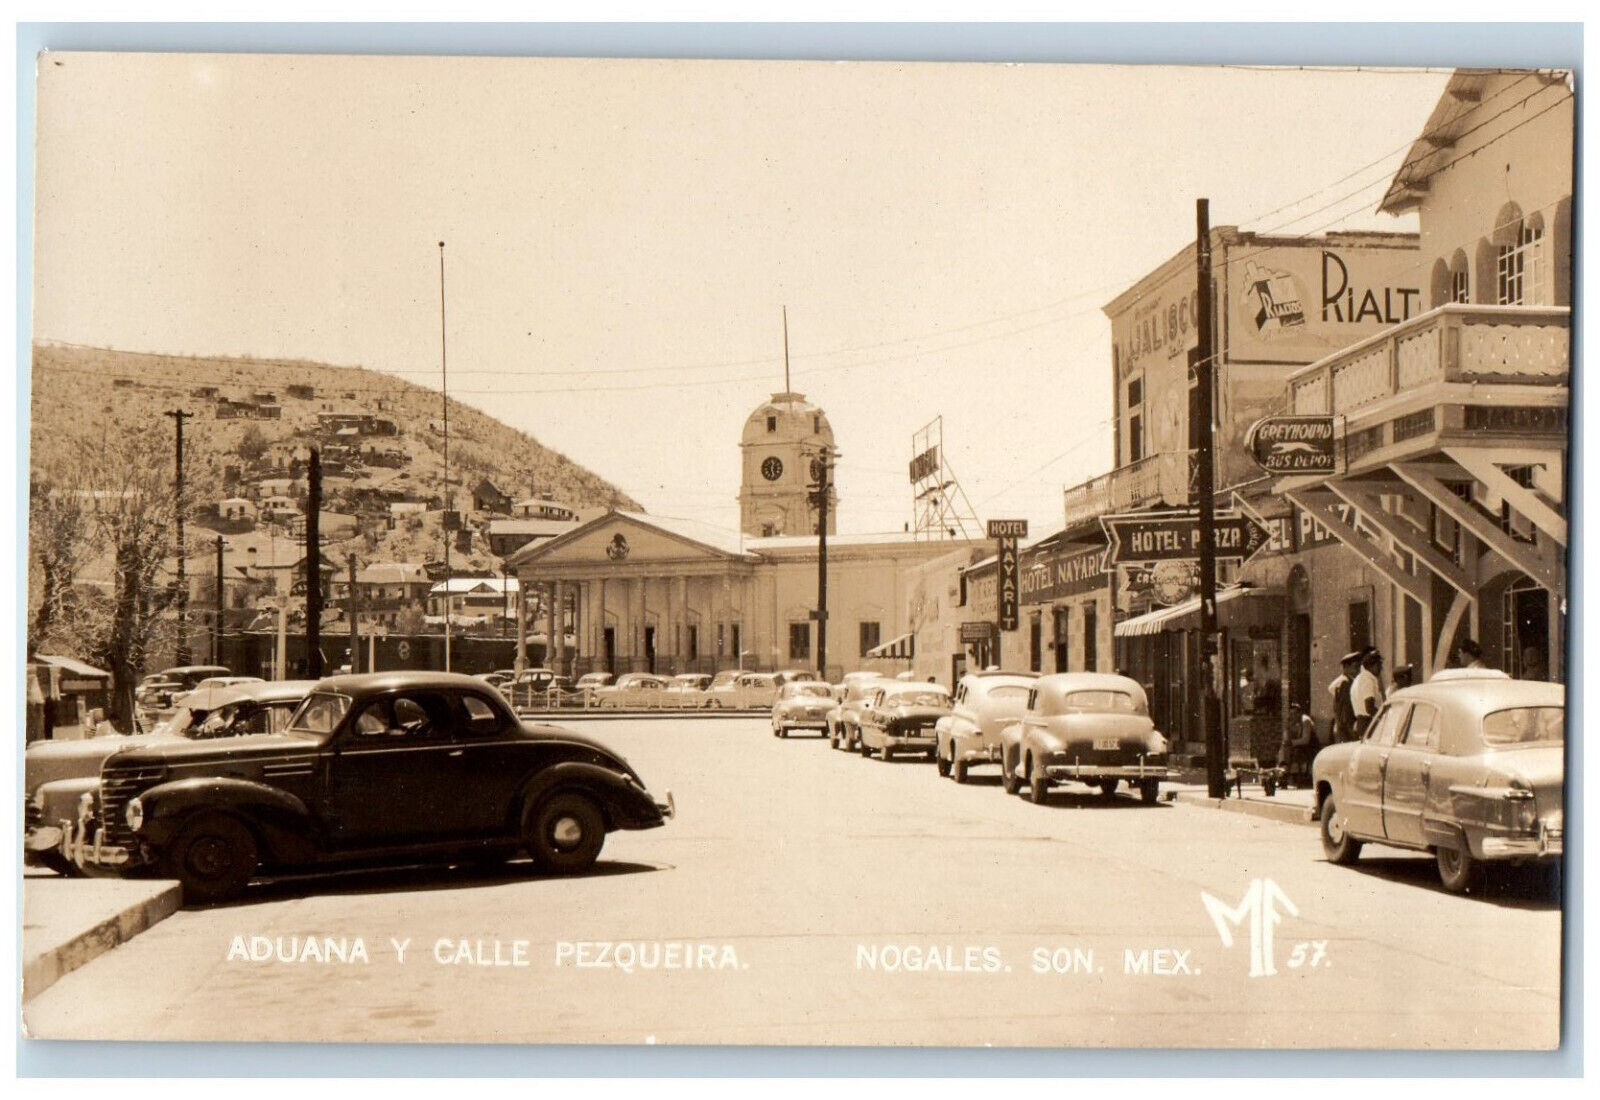 Nogales Sonora Mexico Postcard Customs and Pezqueira Street c1950\'s RPPC Photo